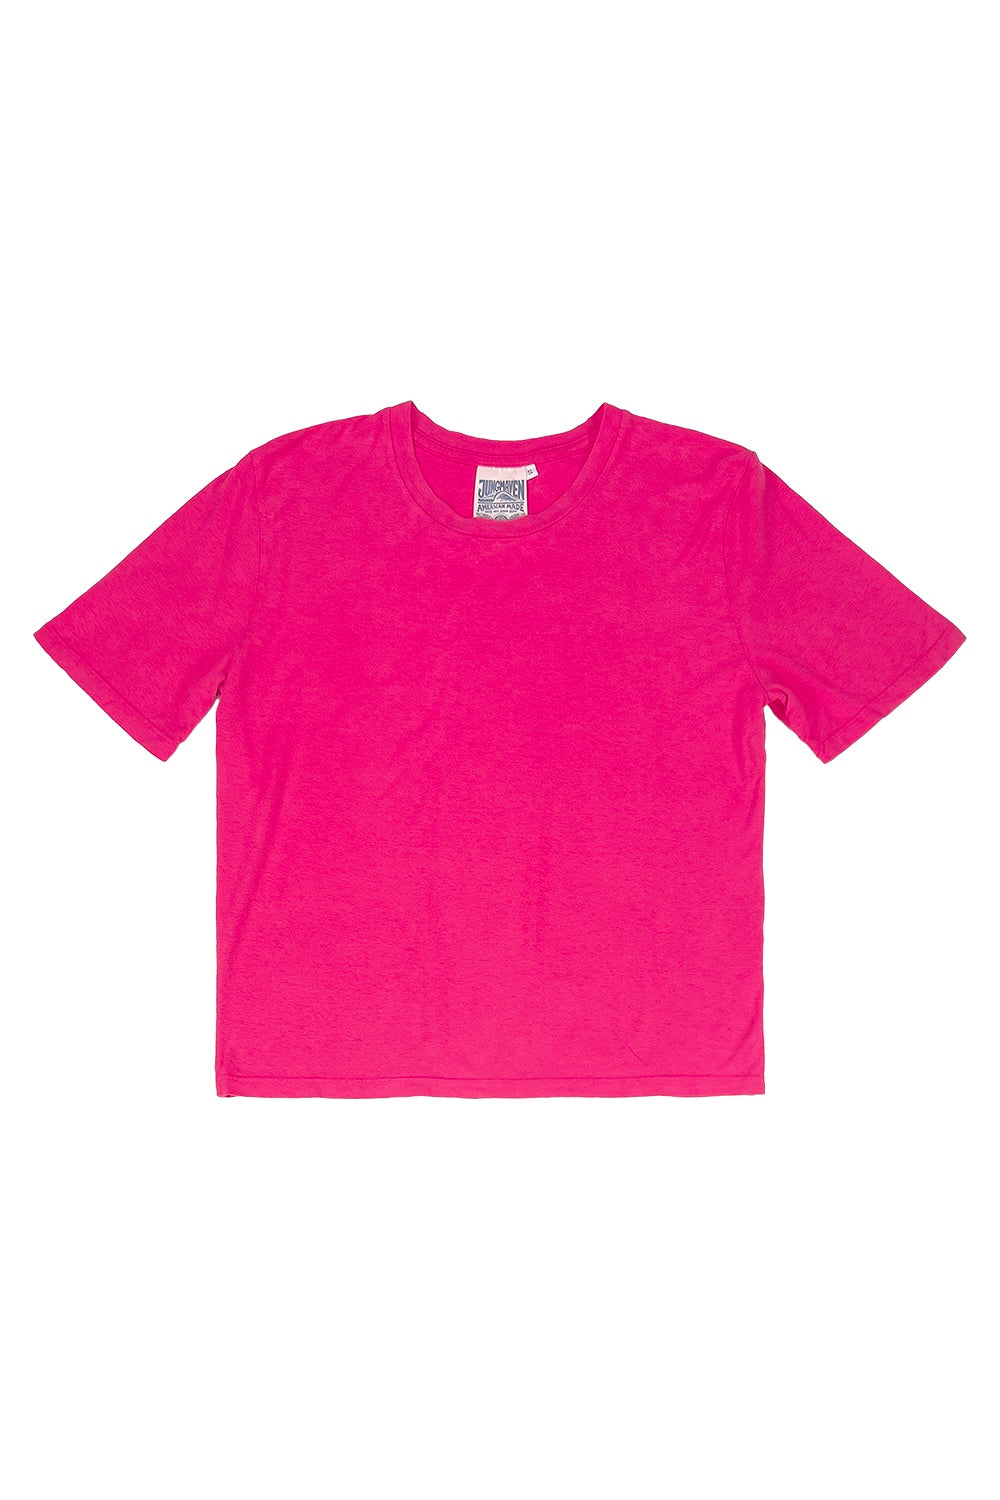 Silverlake Cropped Tee | Jungmaven Hemp Clothing & Accessories / Color: Pink Grapefruit